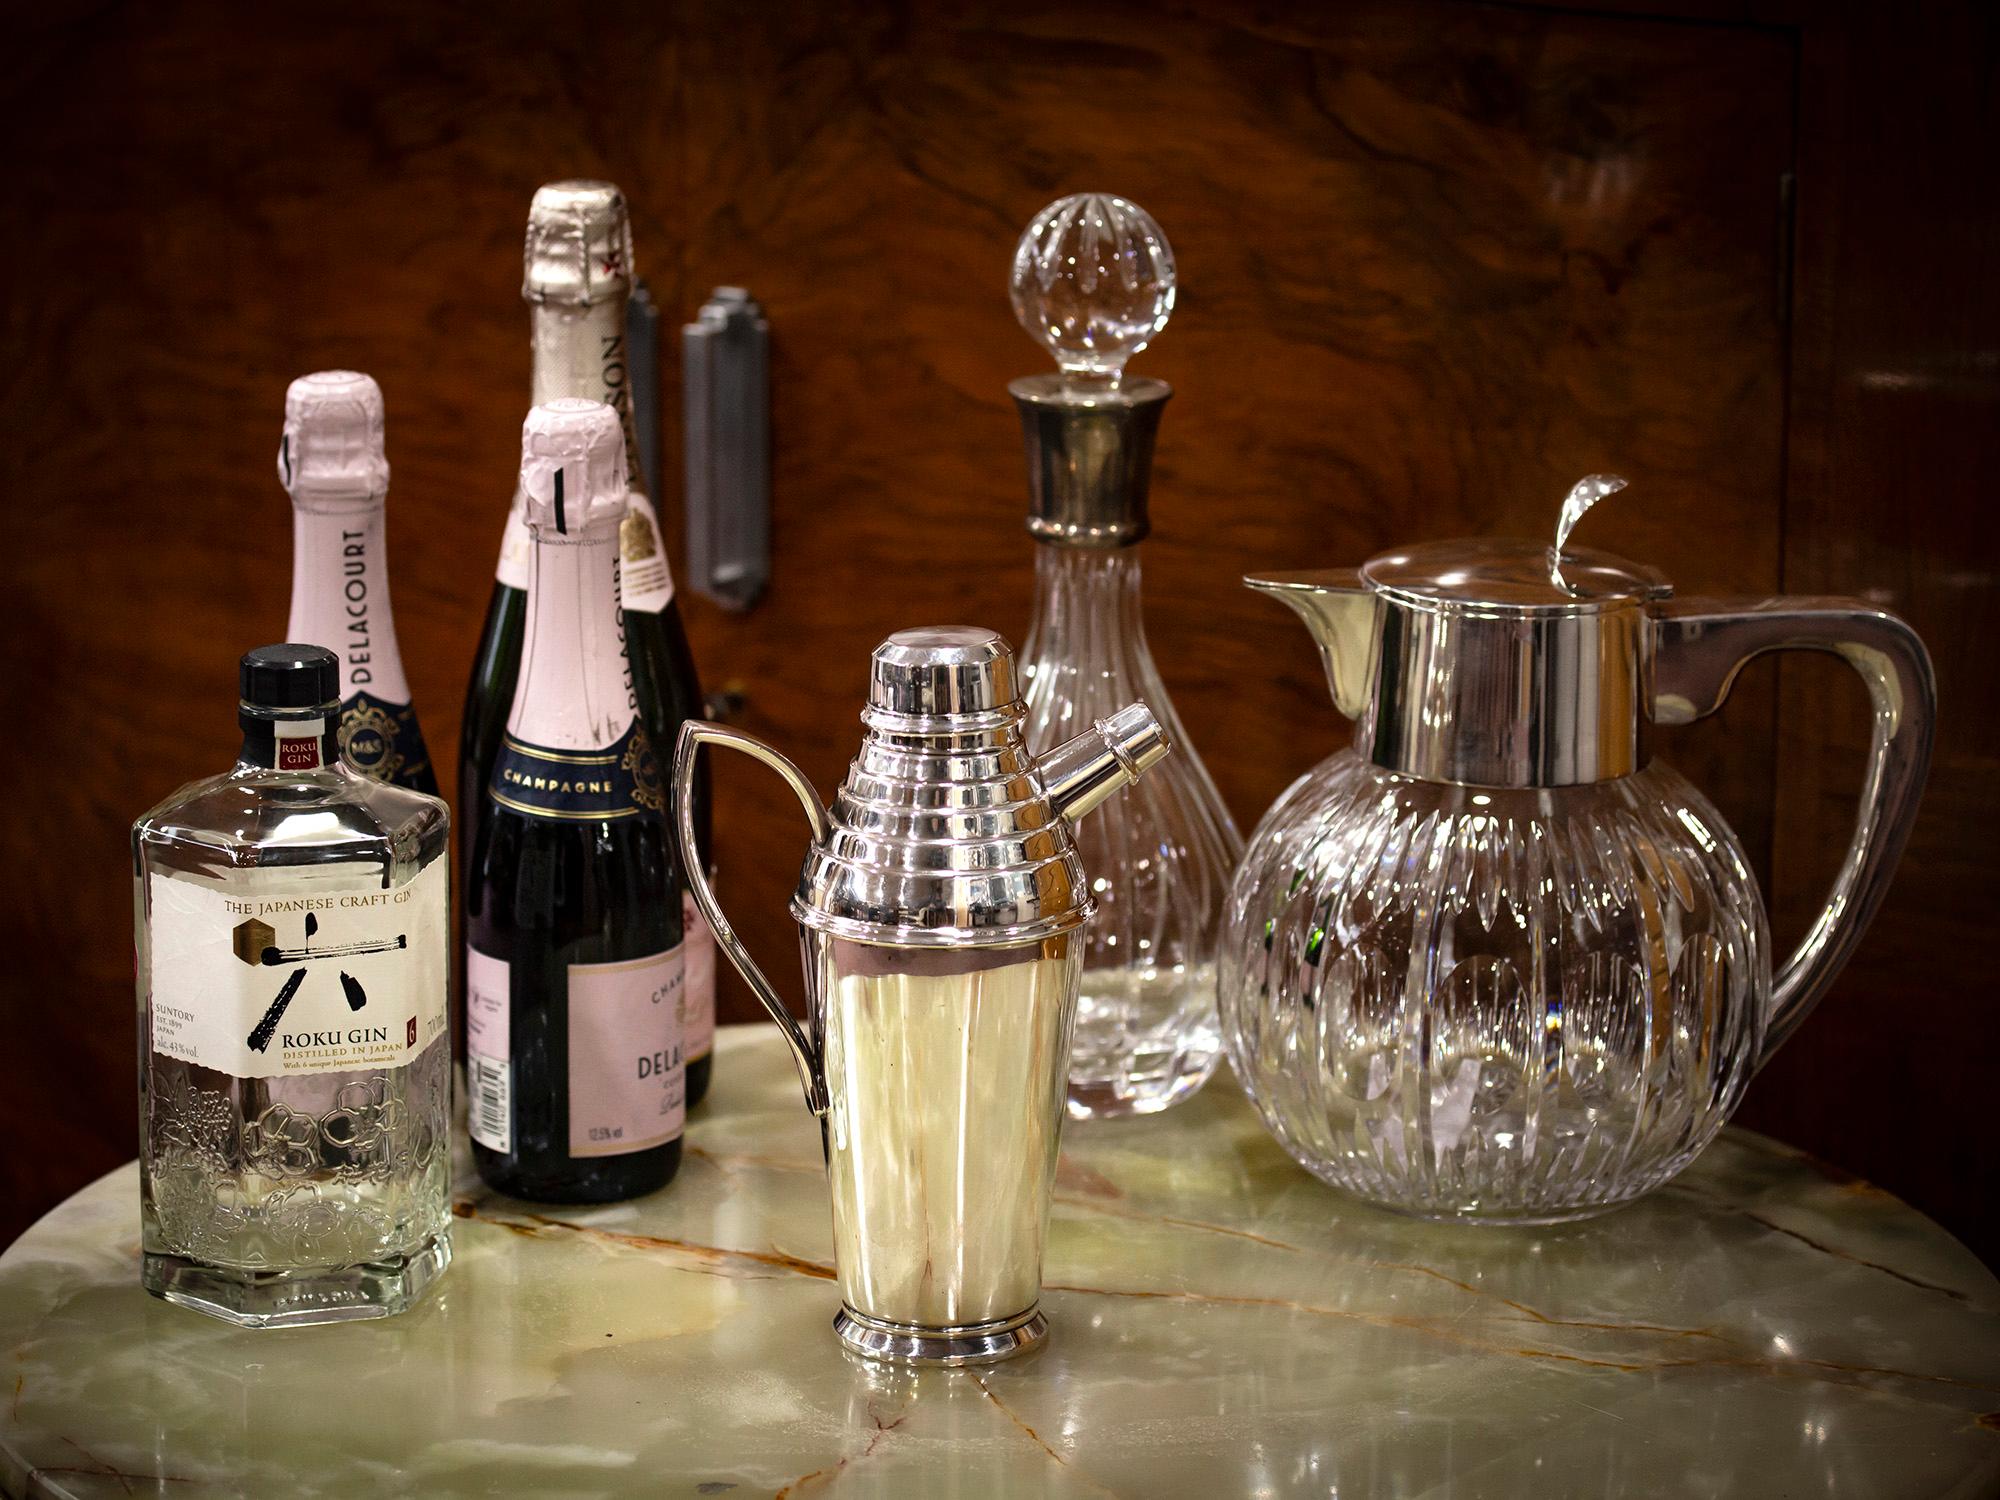 With Tilt Pour Action 

From our Barware collection, we are thrilled to offer this Asprey silver plated Cocktail Shaker. The shaker of milk churn style with long pointed handle and capped spout finished with a stepped body up to a chamfered lid. The